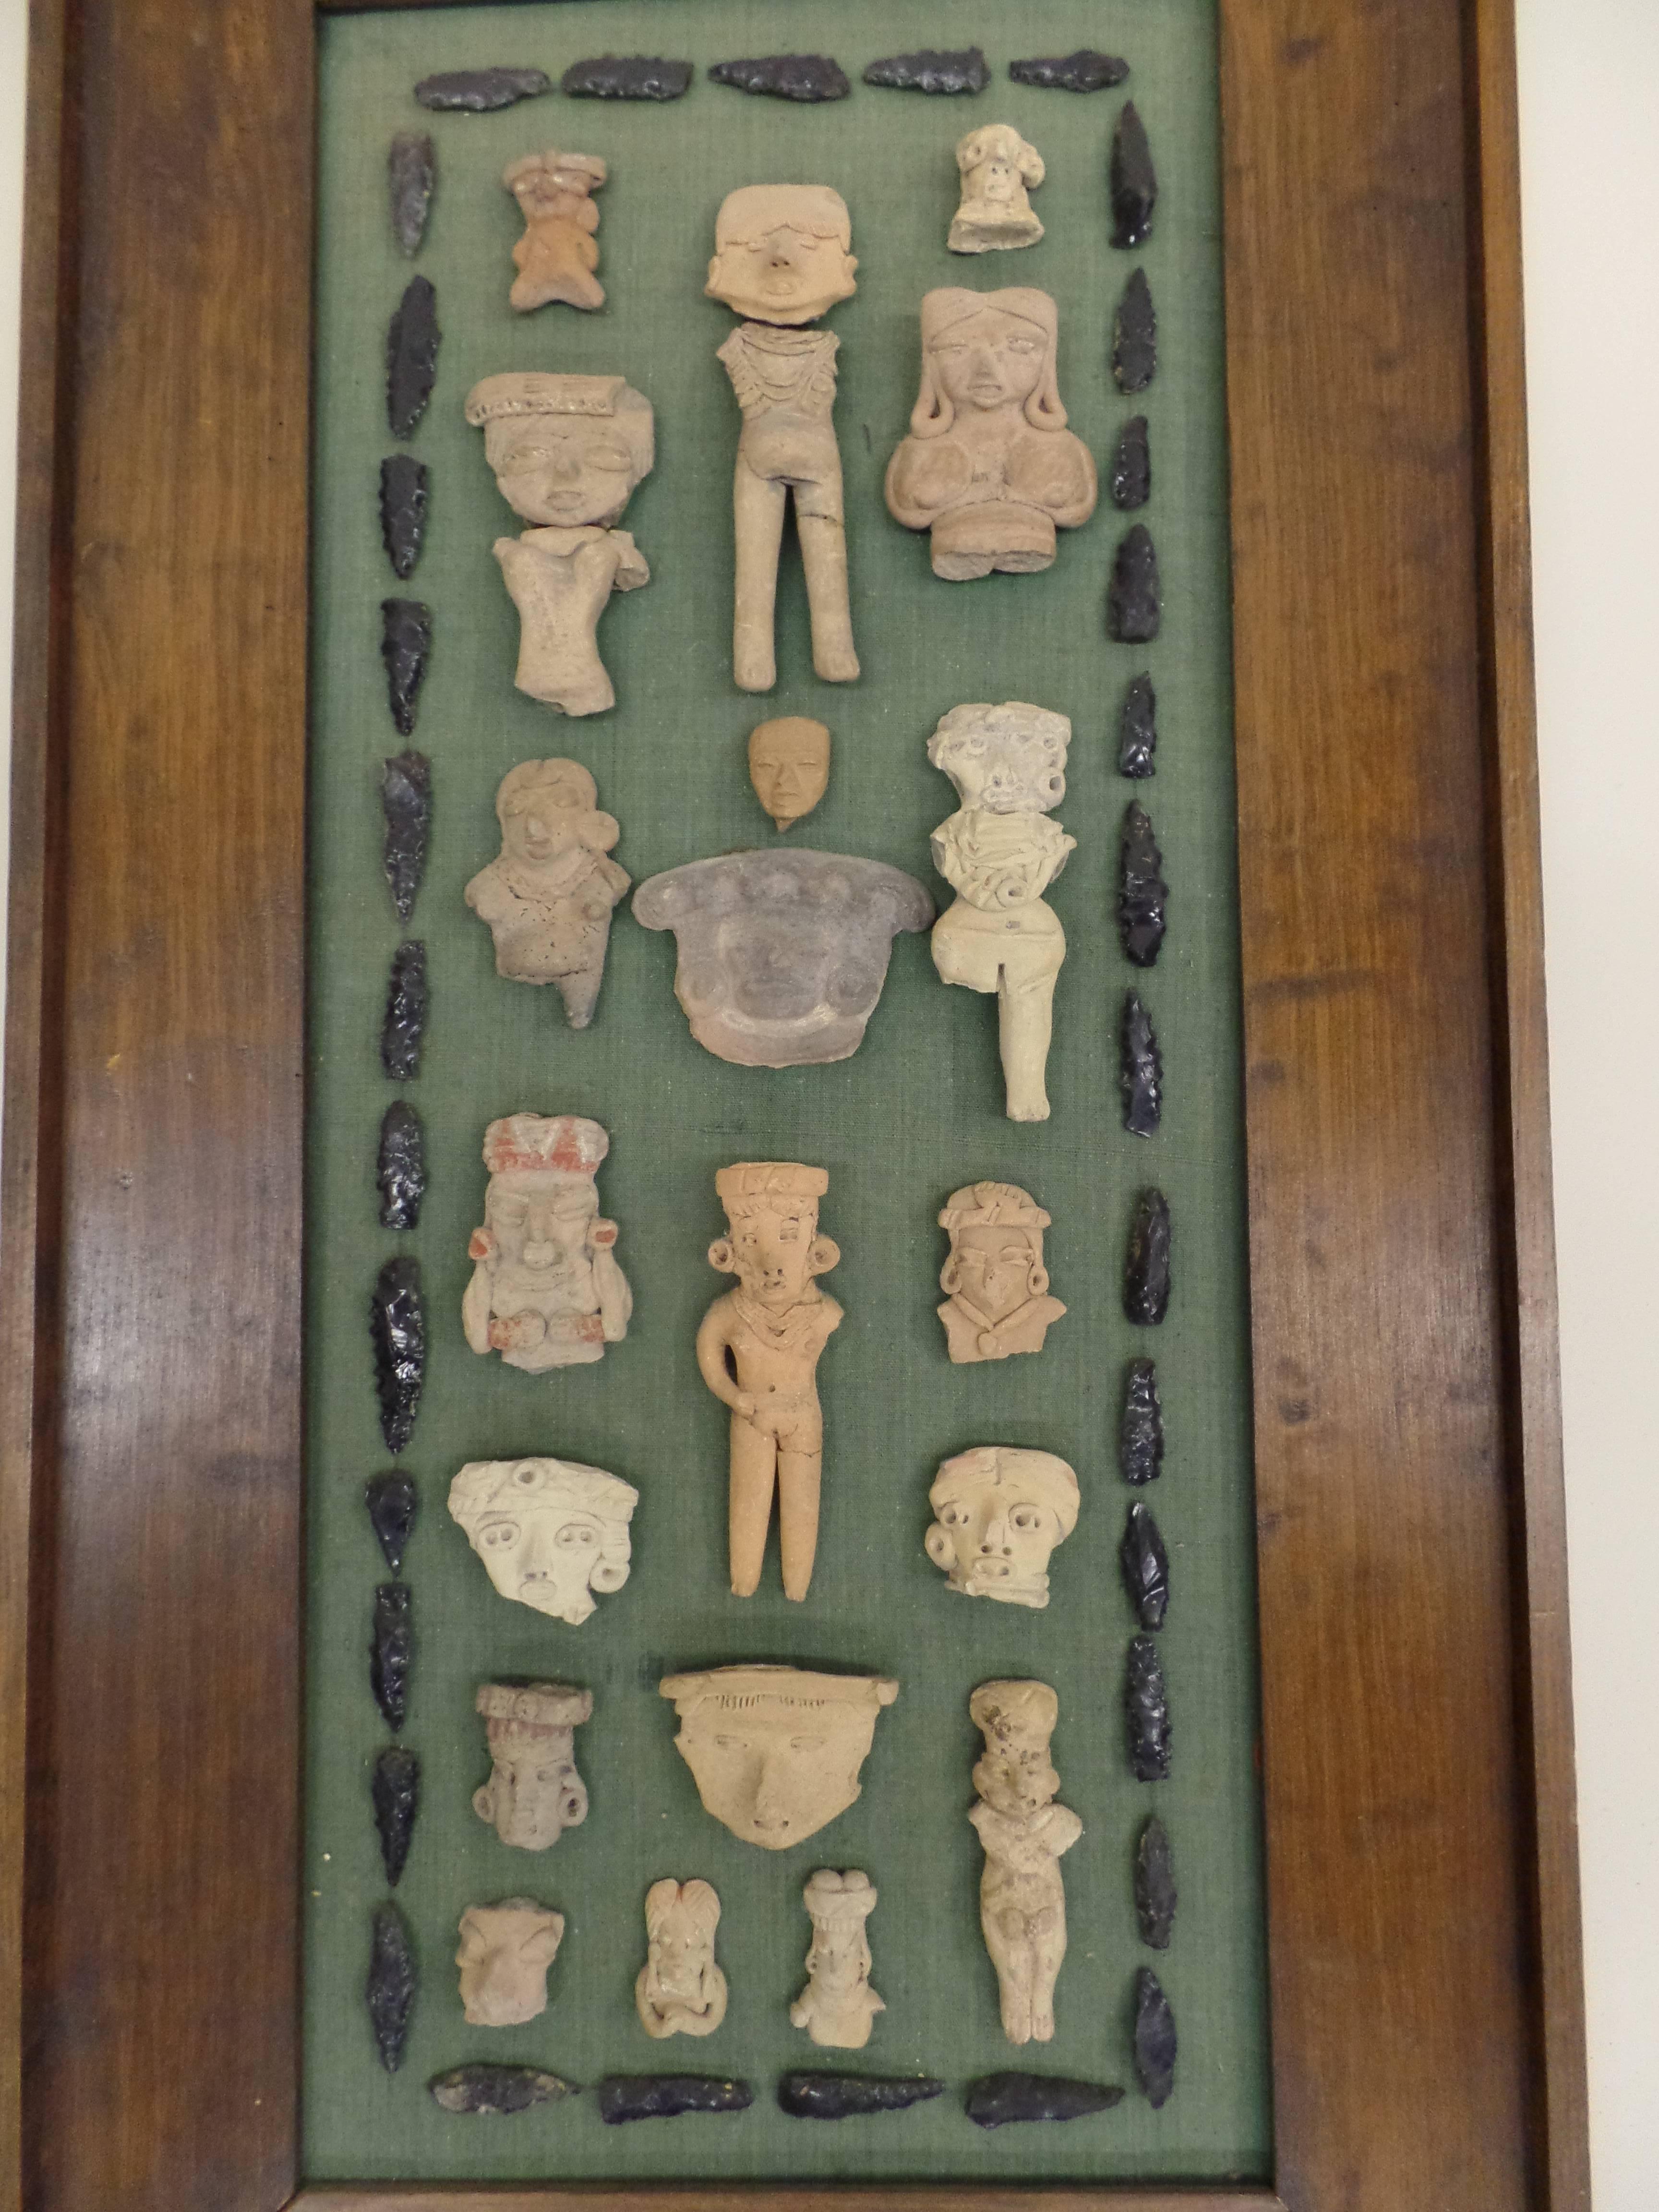 Incredible collection of pre-columbian clay sculptures / figures / statues / pottery, mounted and framed. The pieces date from the pre-classic (Formative) period of Meso-American cultures that inhabited present day Mexico and Guatemala. 

During